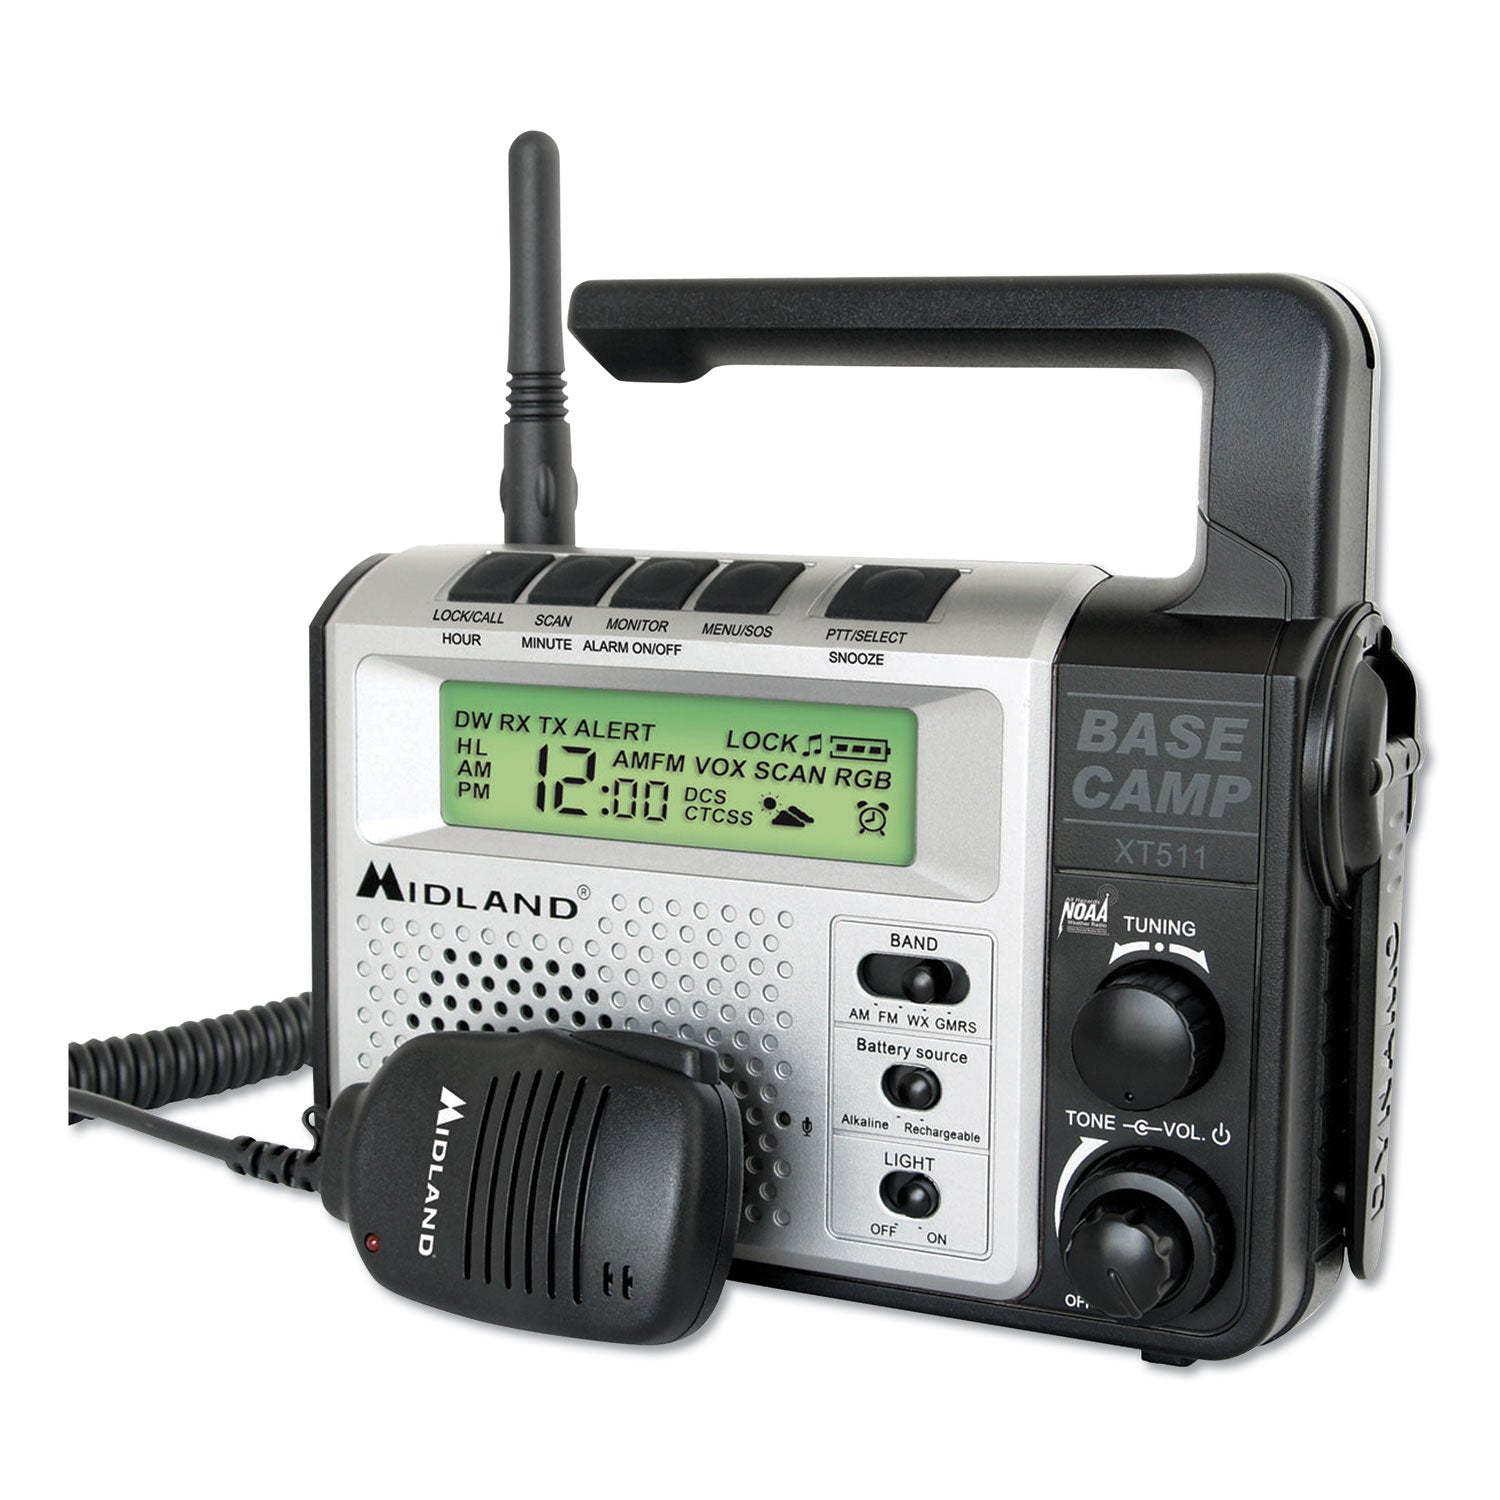 xt511-gmrs-base-camp-two-way-radio-5-w-22-channels-22-frequencies_mroxt511 - 1